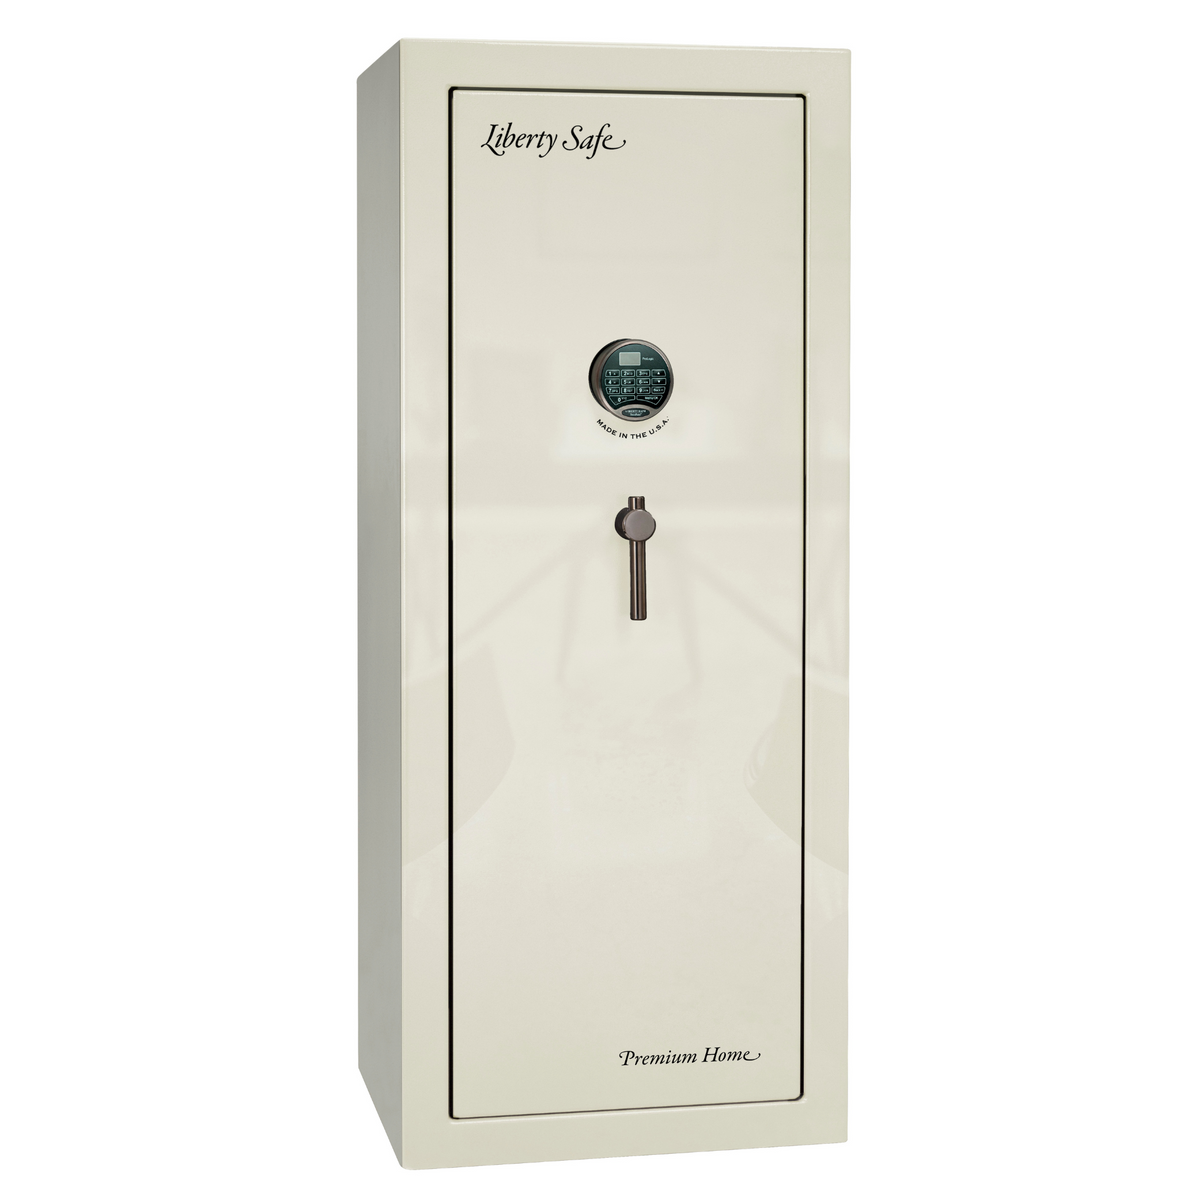 Premium Home Series | Level 7 Security | 2 Hour Fire Protection | 17 | Dimensions: 60.25&quot;(H) x 24.5&quot;(W) x 19&quot;(D) | White Gloss - Closed Door